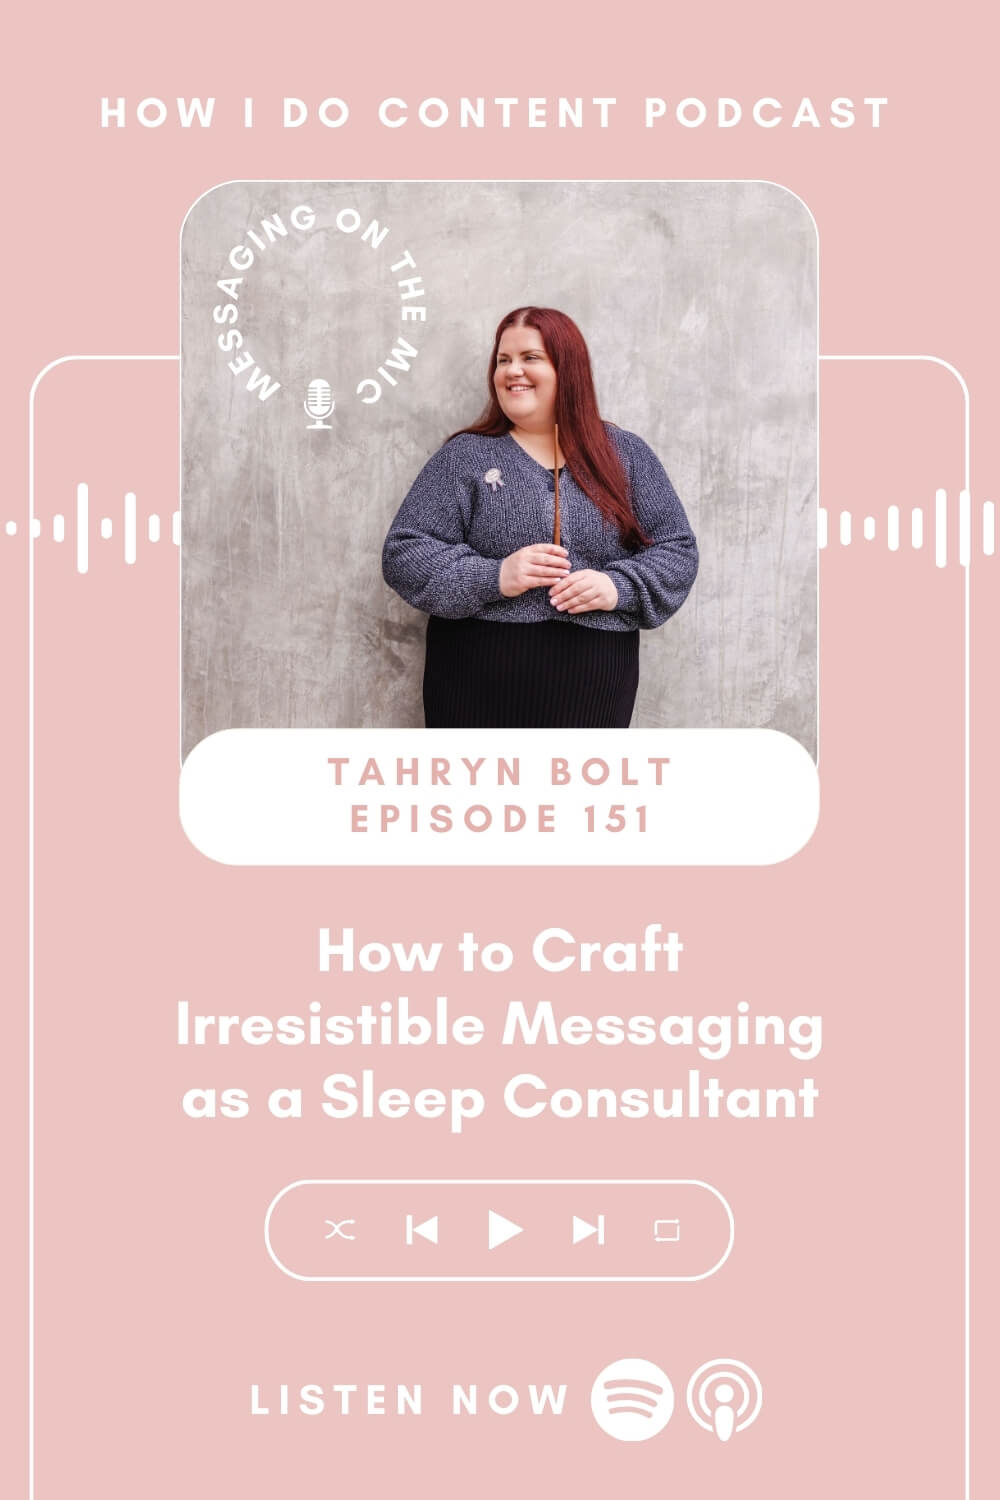 How to Craft Irresistible Messaging as a Sleep Consultant